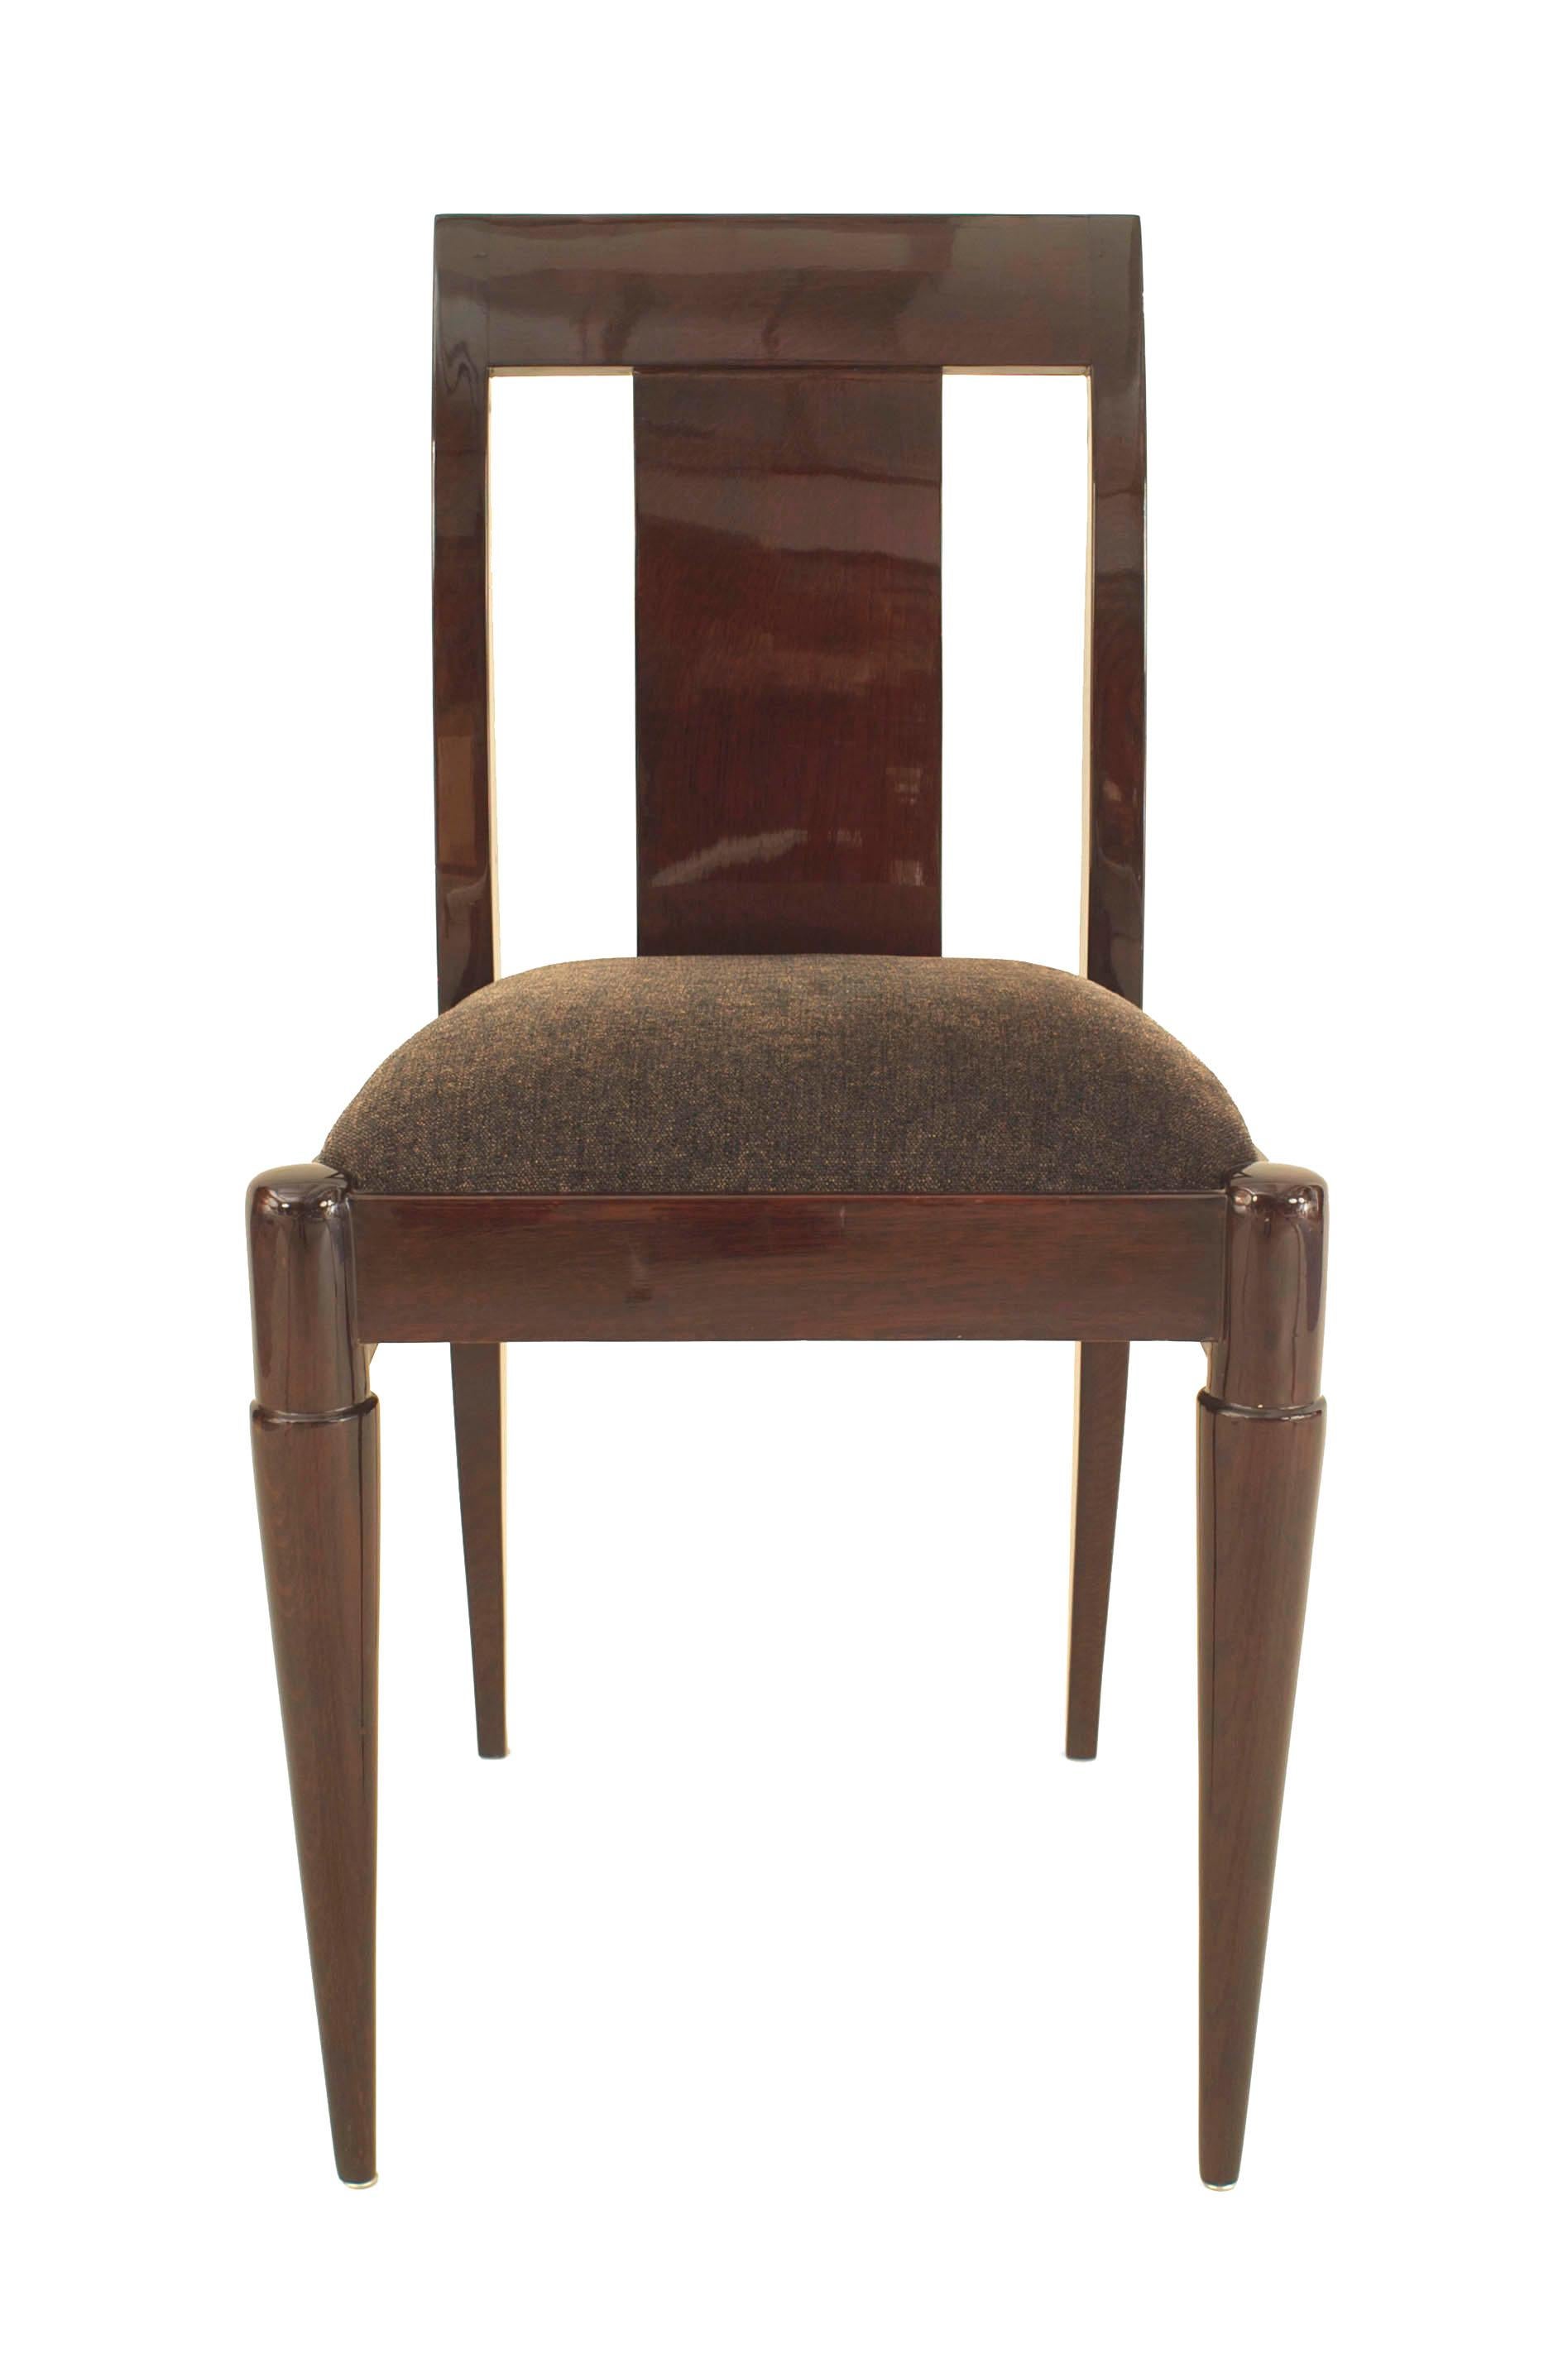 Set of 12 French side chairs. These stained mahogany side chairs were designed with square backs, center panels and upholstered seats each supported by four round tapered legs.
